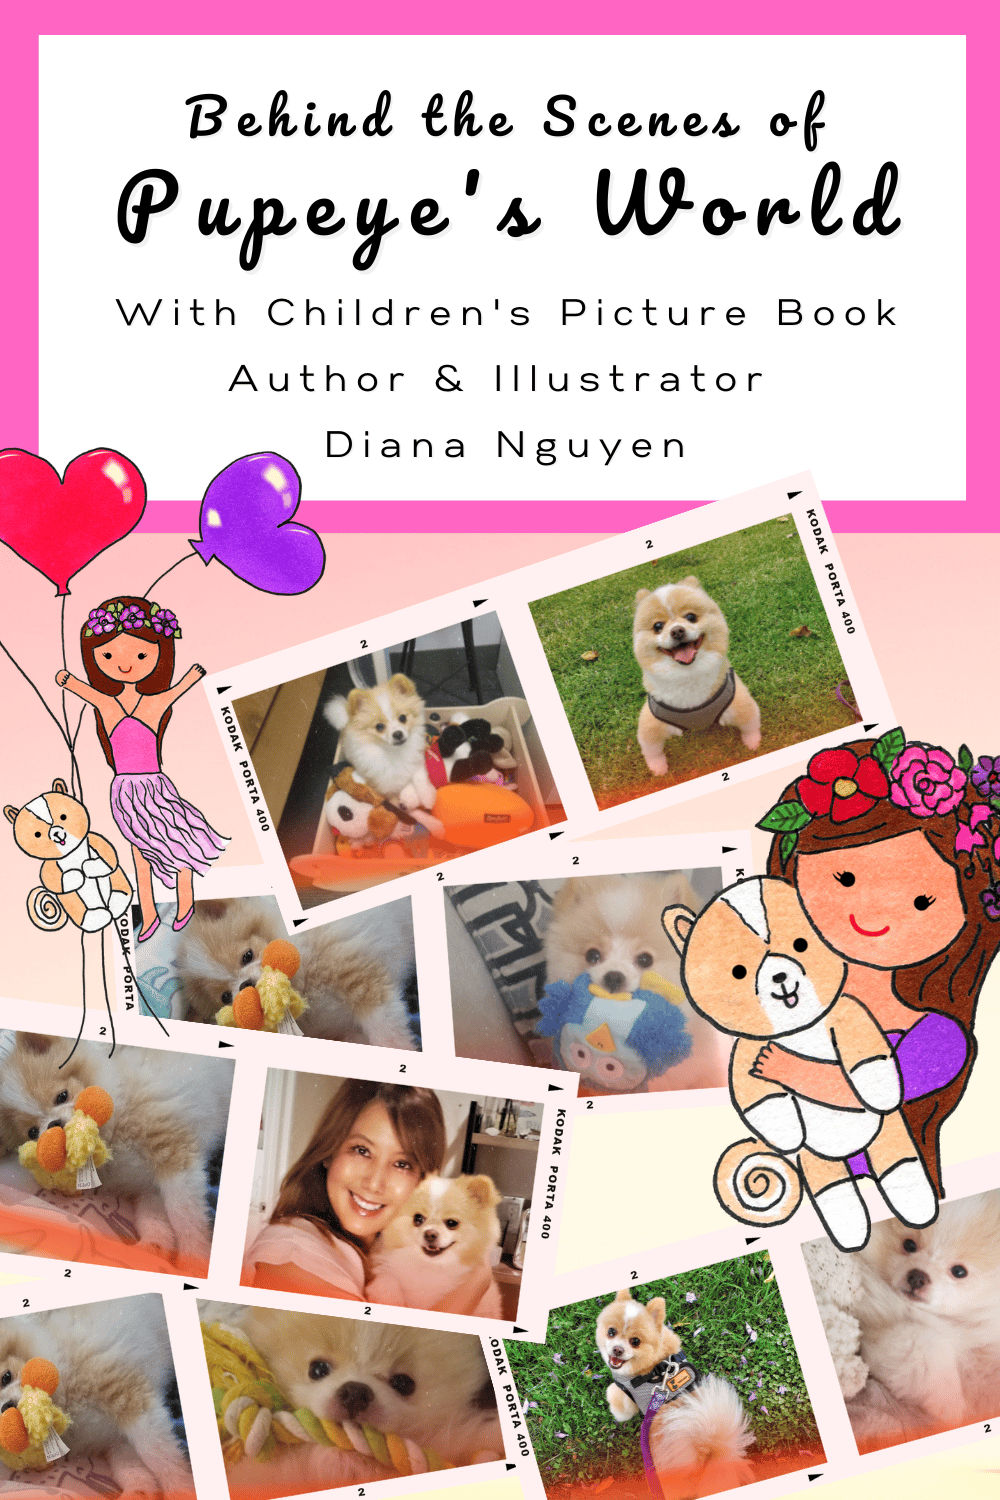 Behind the Scenes of Pupeye's World with Children's Book Author & Illustrator Diana Nguyen